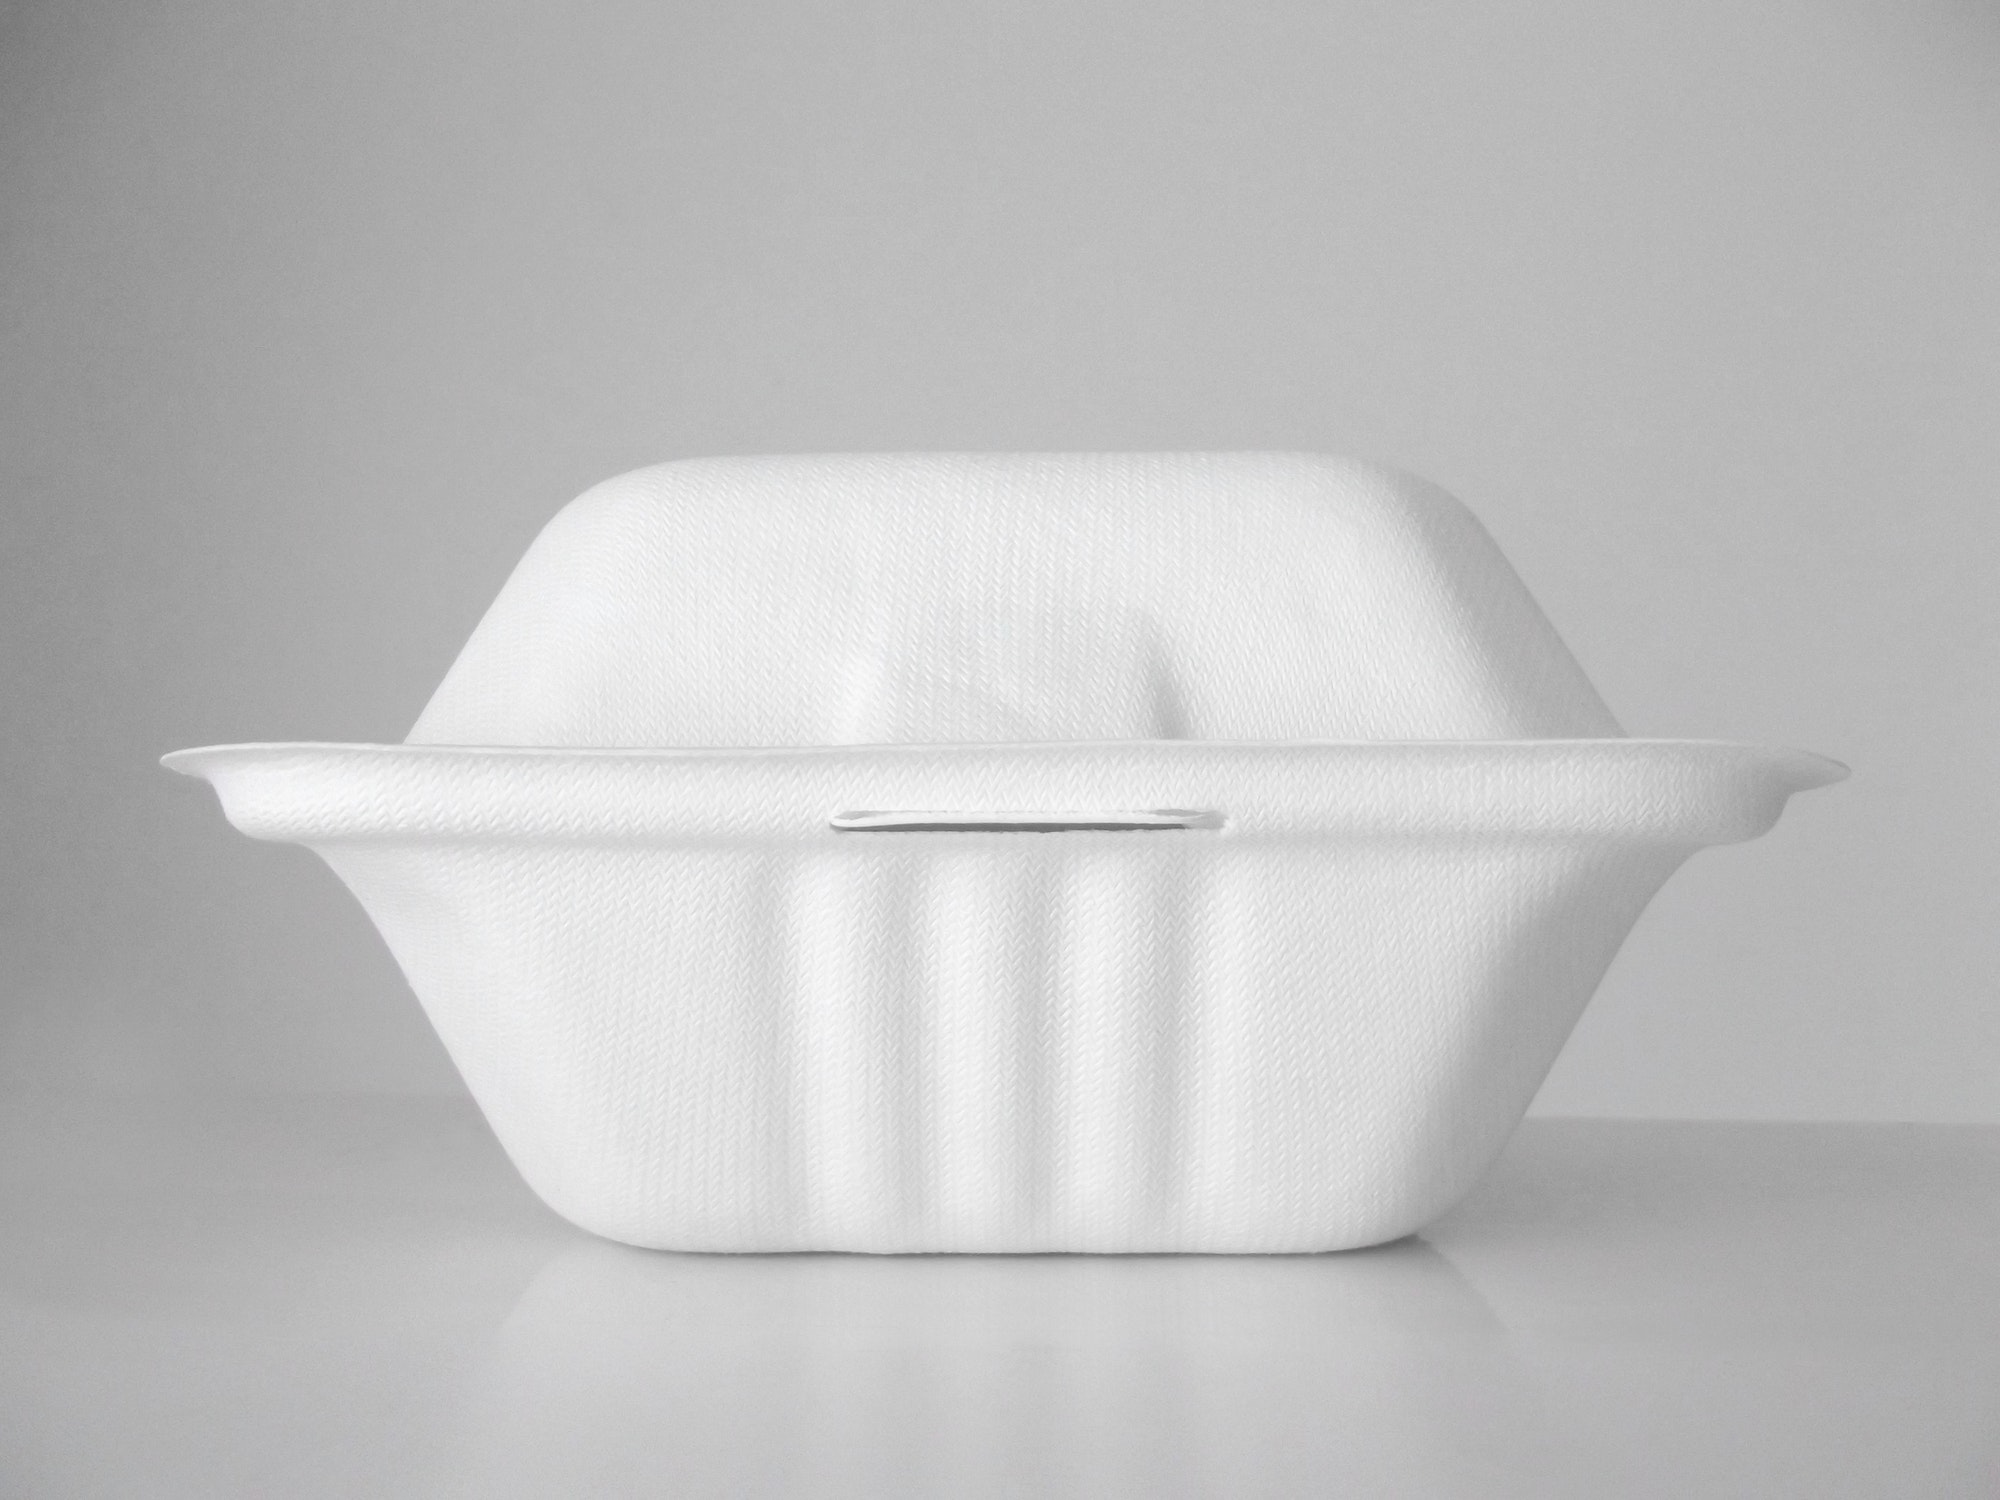 Clam shell style takeaway food packaging